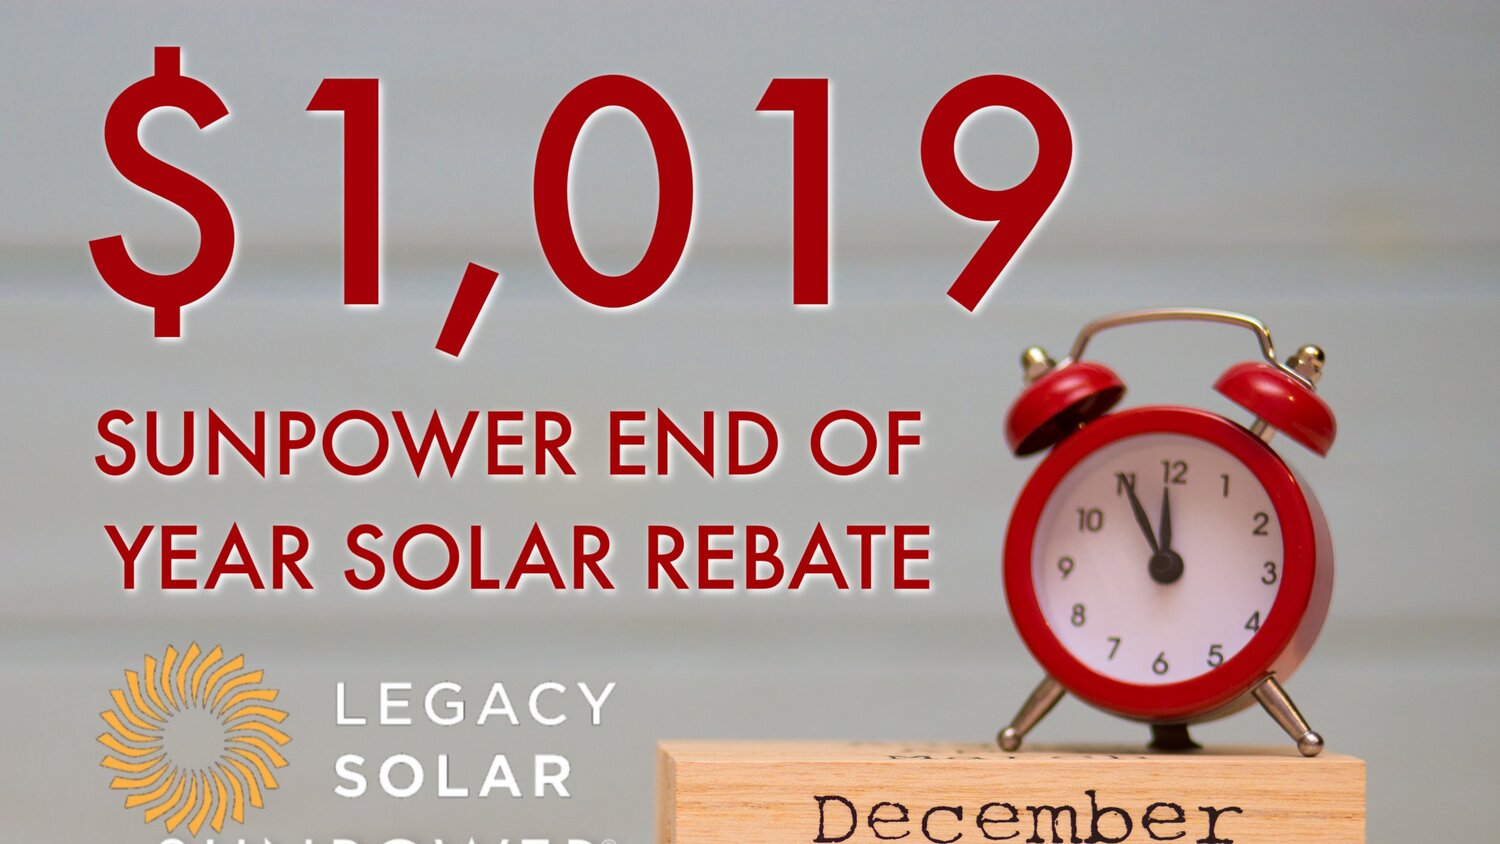 act-now-to-get-sunpower-s-end-of-2019-solar-rebate-sunpower-by